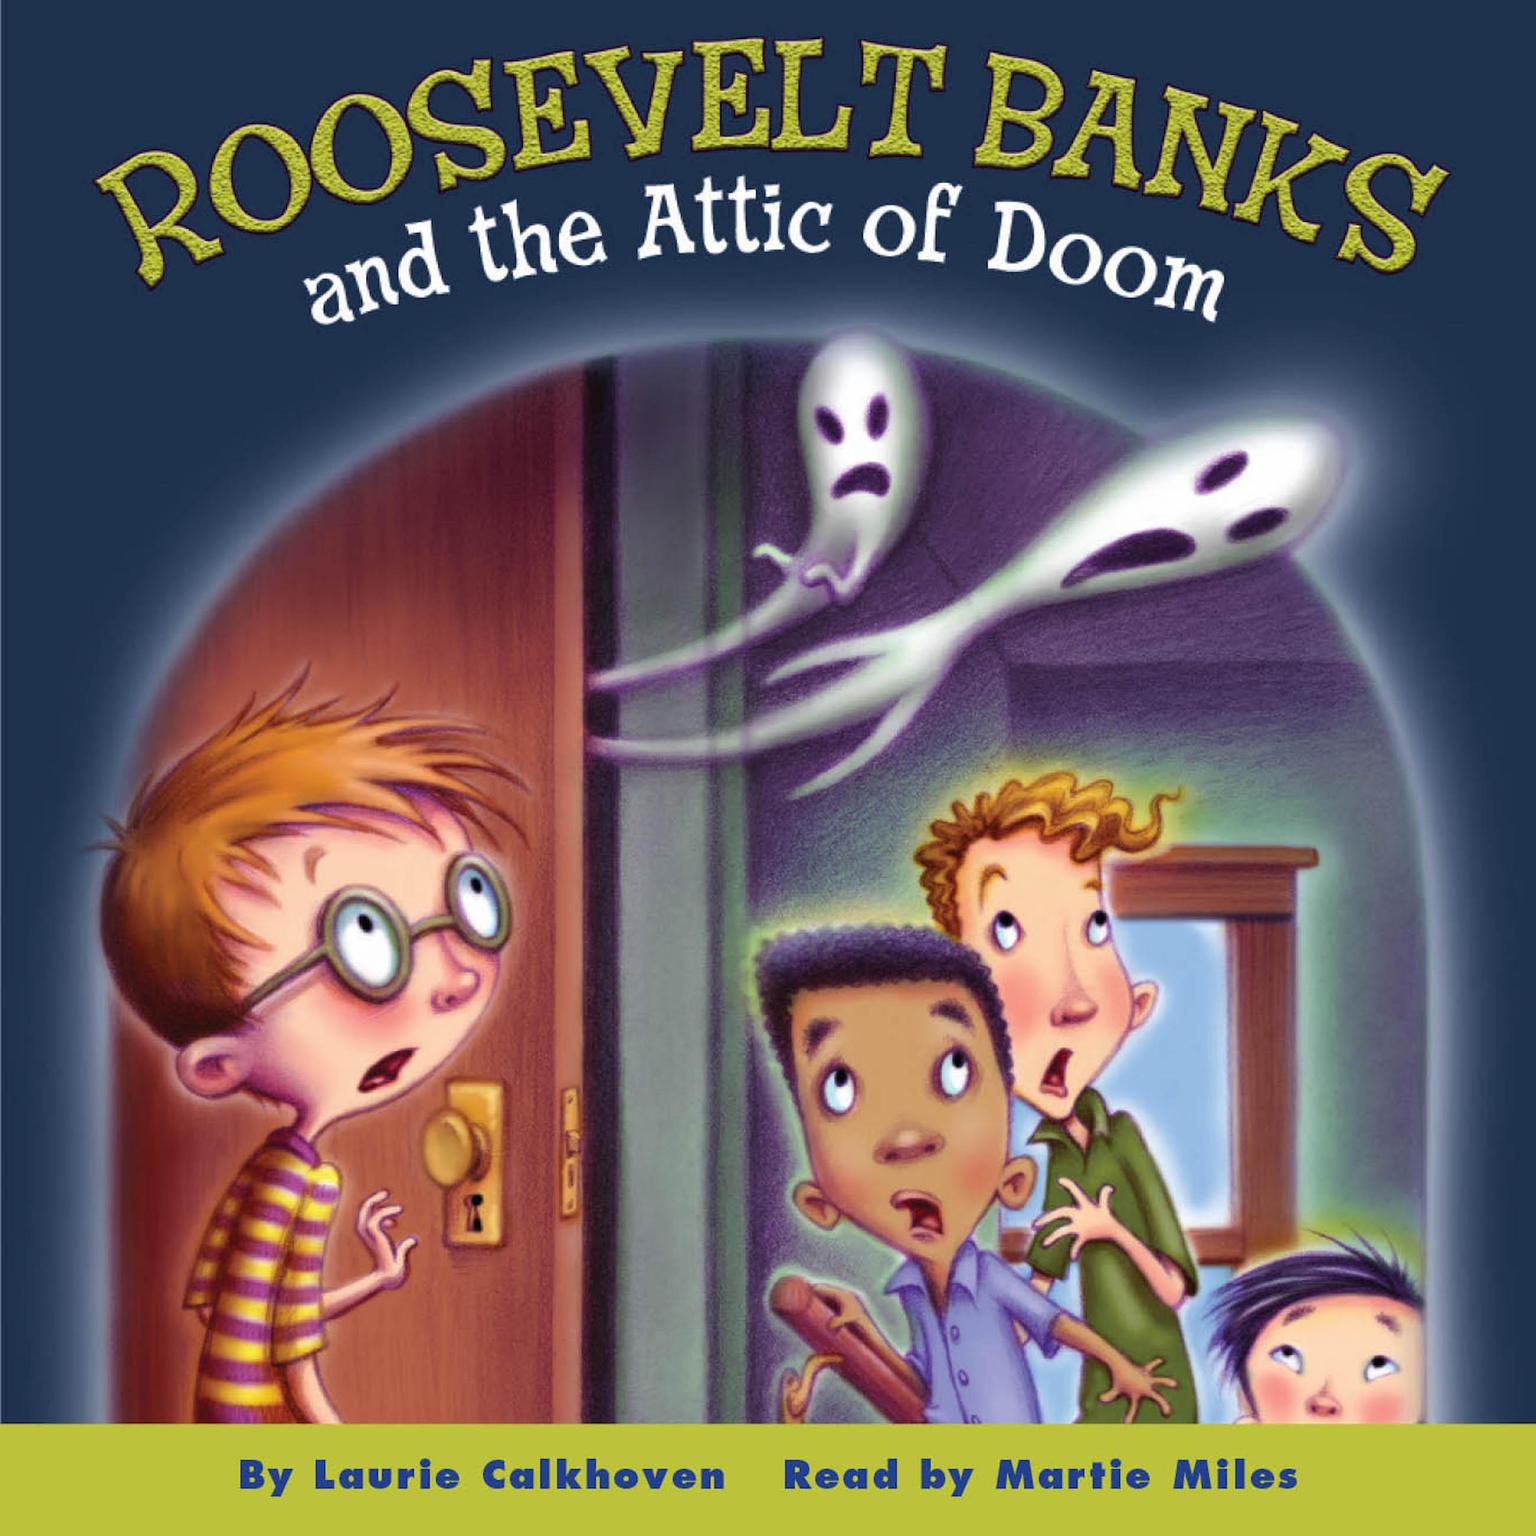 Roosevelt Banks and the Attic of Doom Audiobook, by Laurie Calkhoven